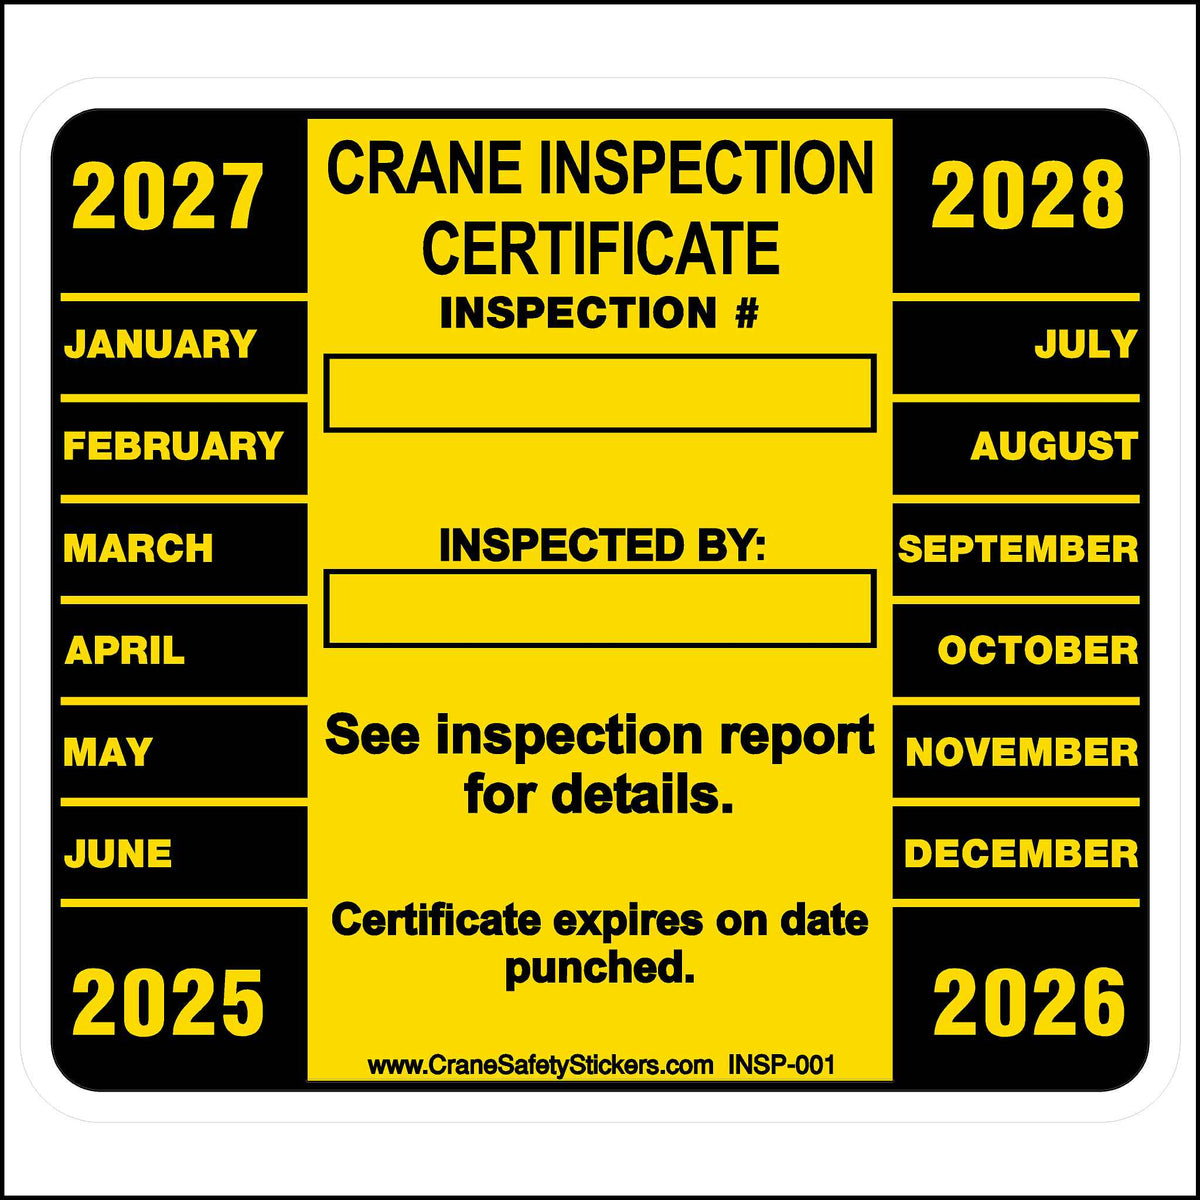 Annual Crane Inspection Sticker Printed in Yellow and Black.